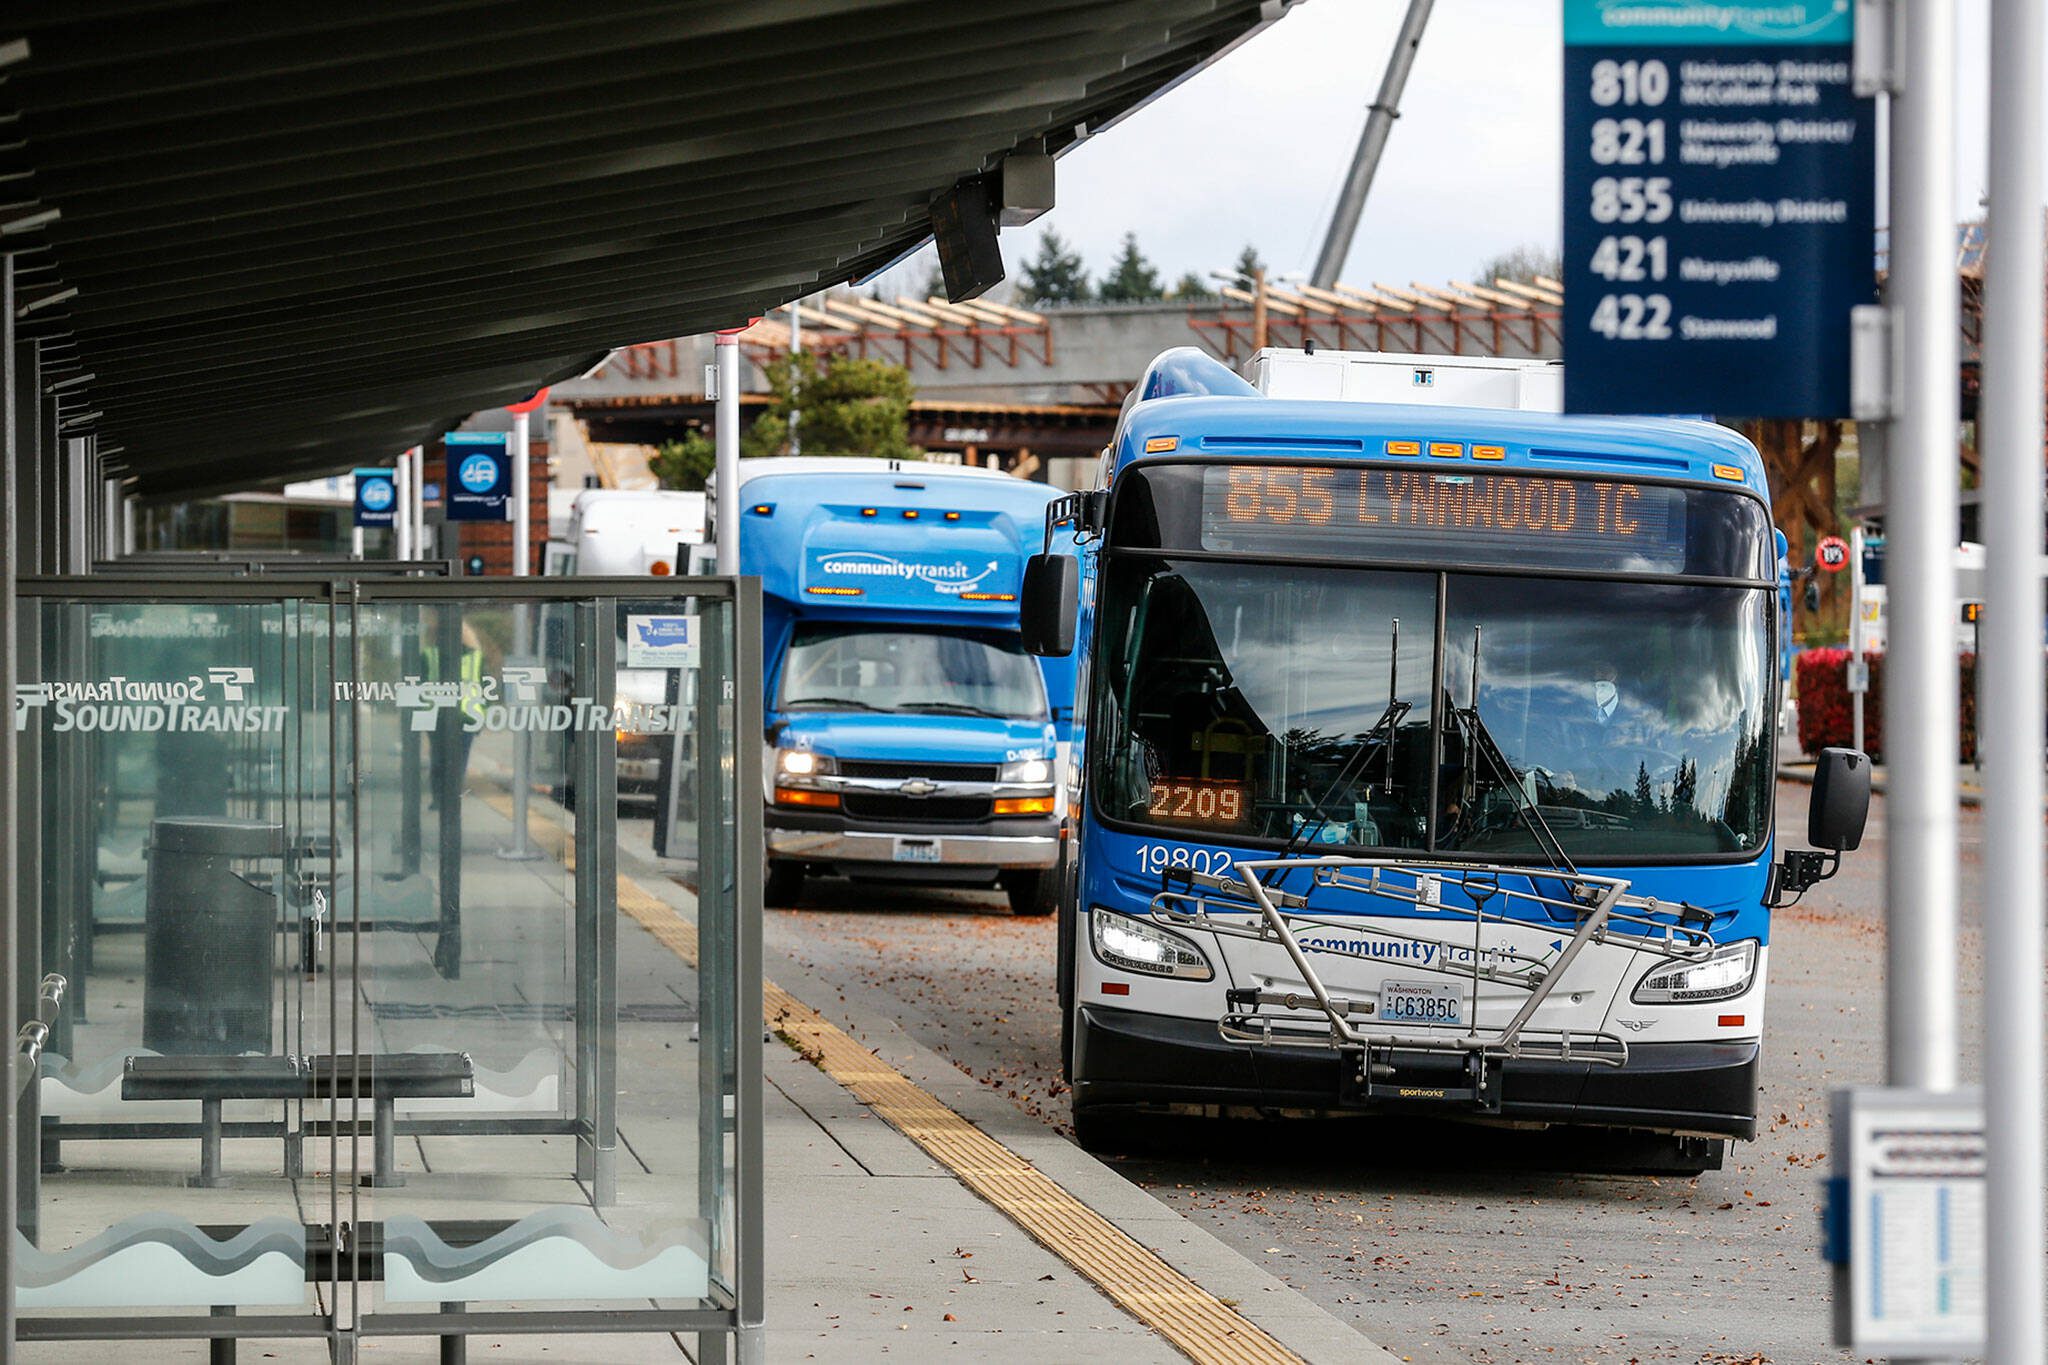 A Community Transit bus waits for passengers. (Kevin Clark / The Herald)